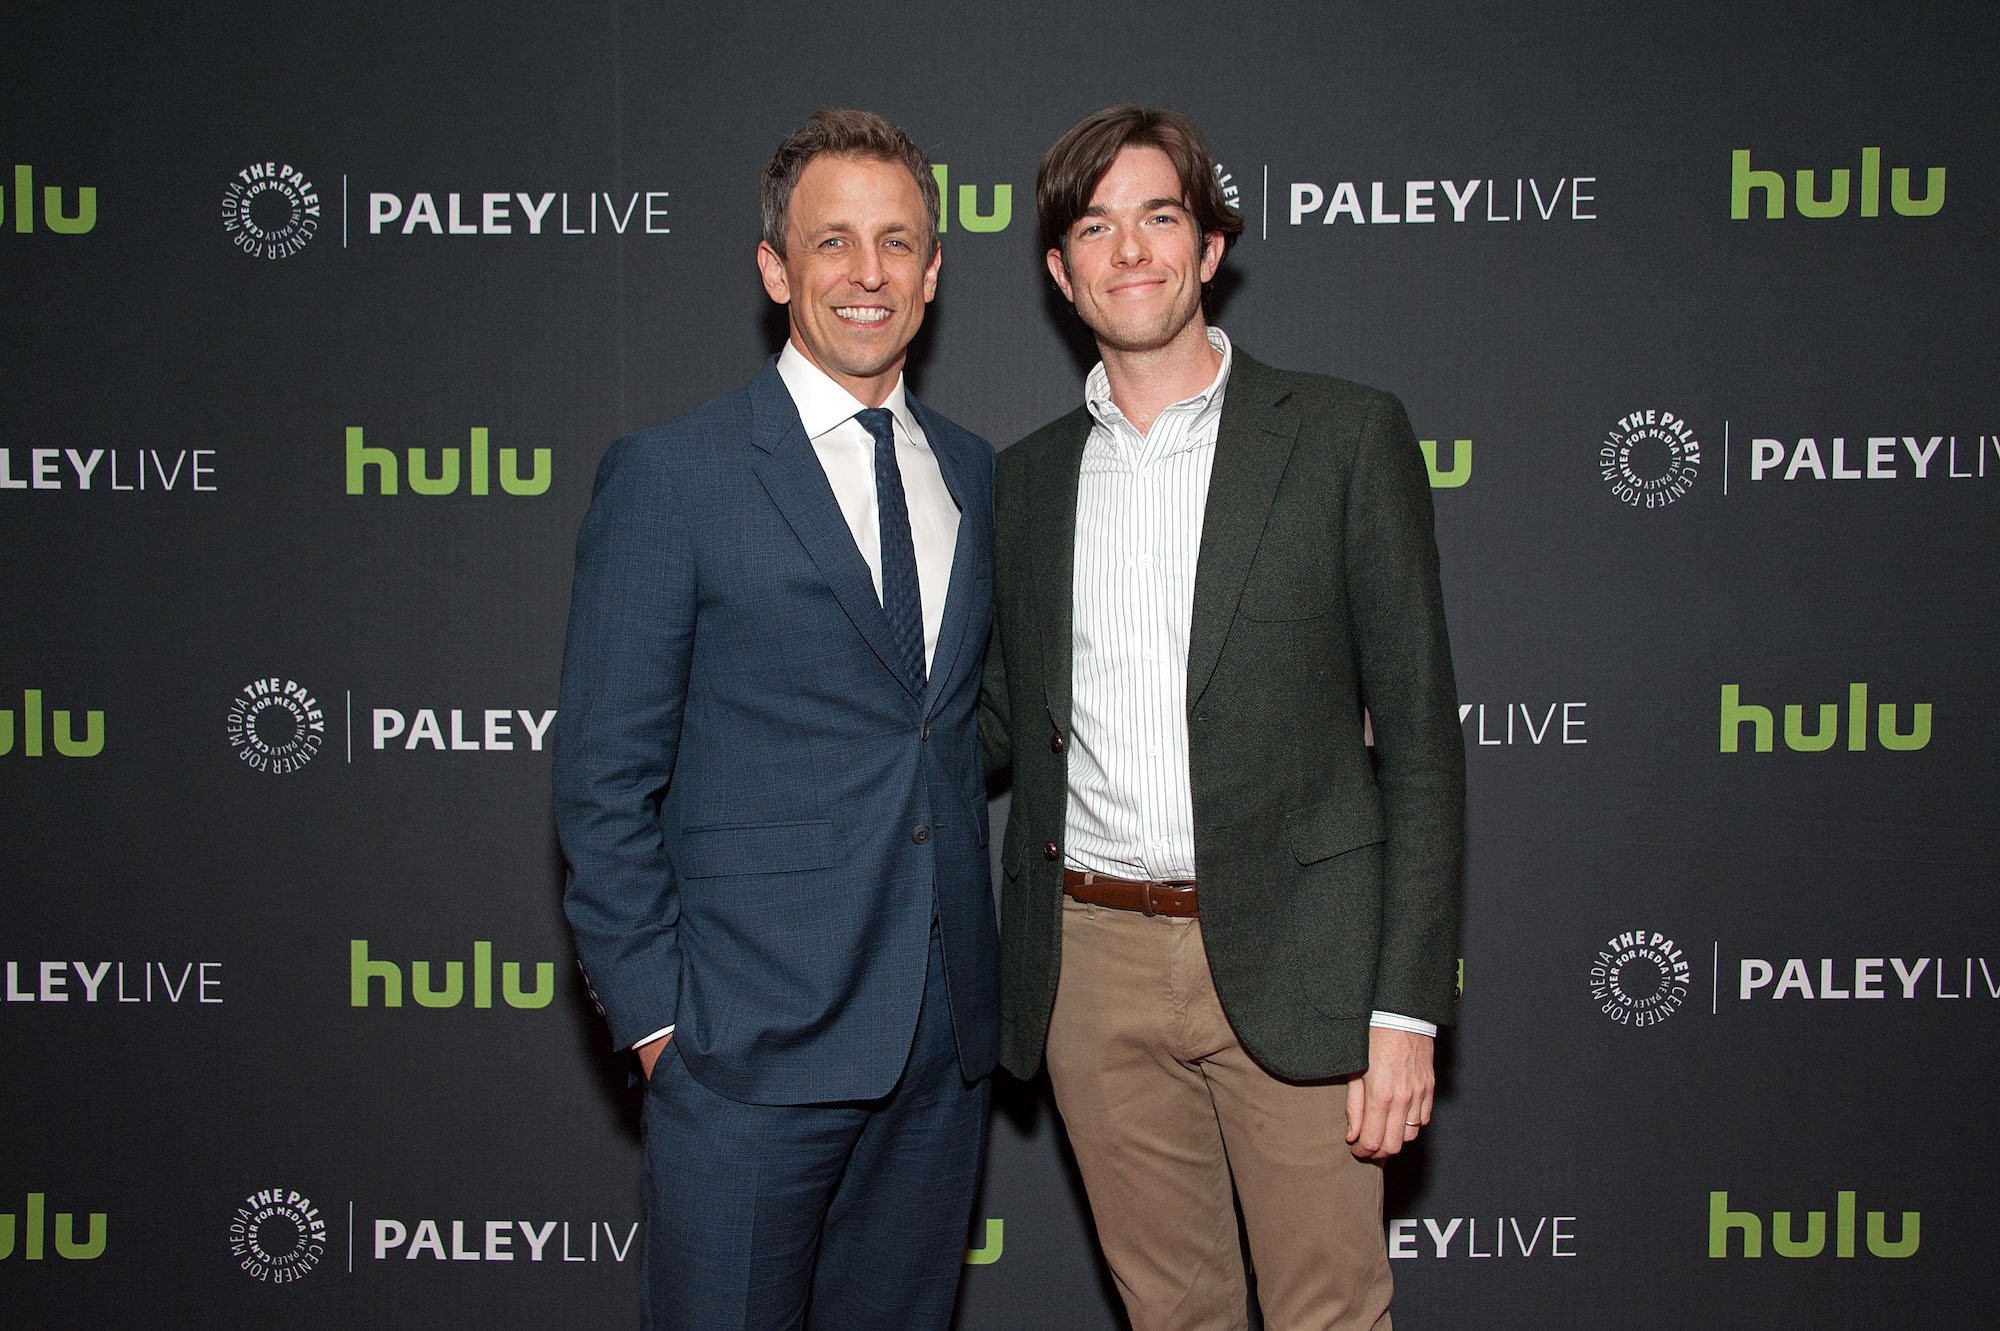 John Mulaney Said He Won His First Emmy With Seth Meyers Due to a Misunderstanding